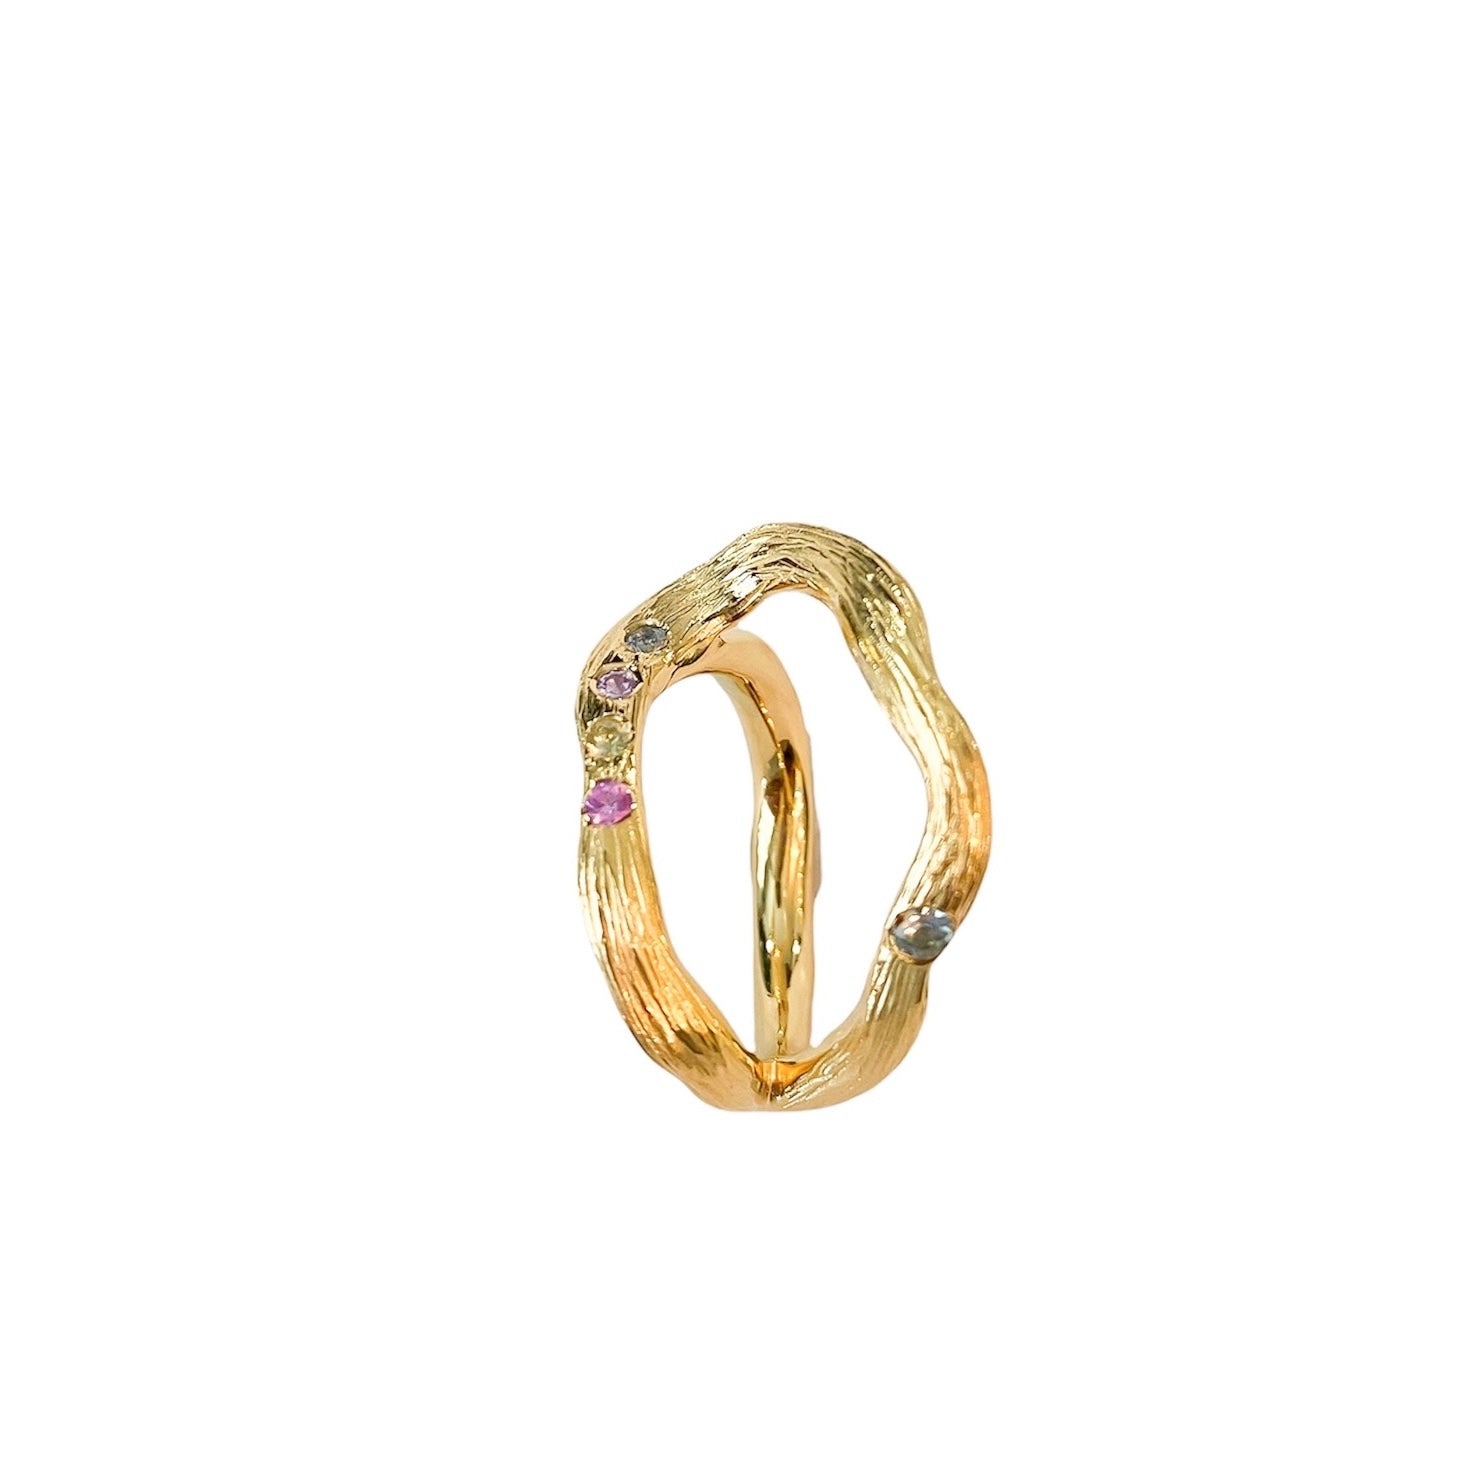 Simone Noa Oceania gold plated silver ring, top view.